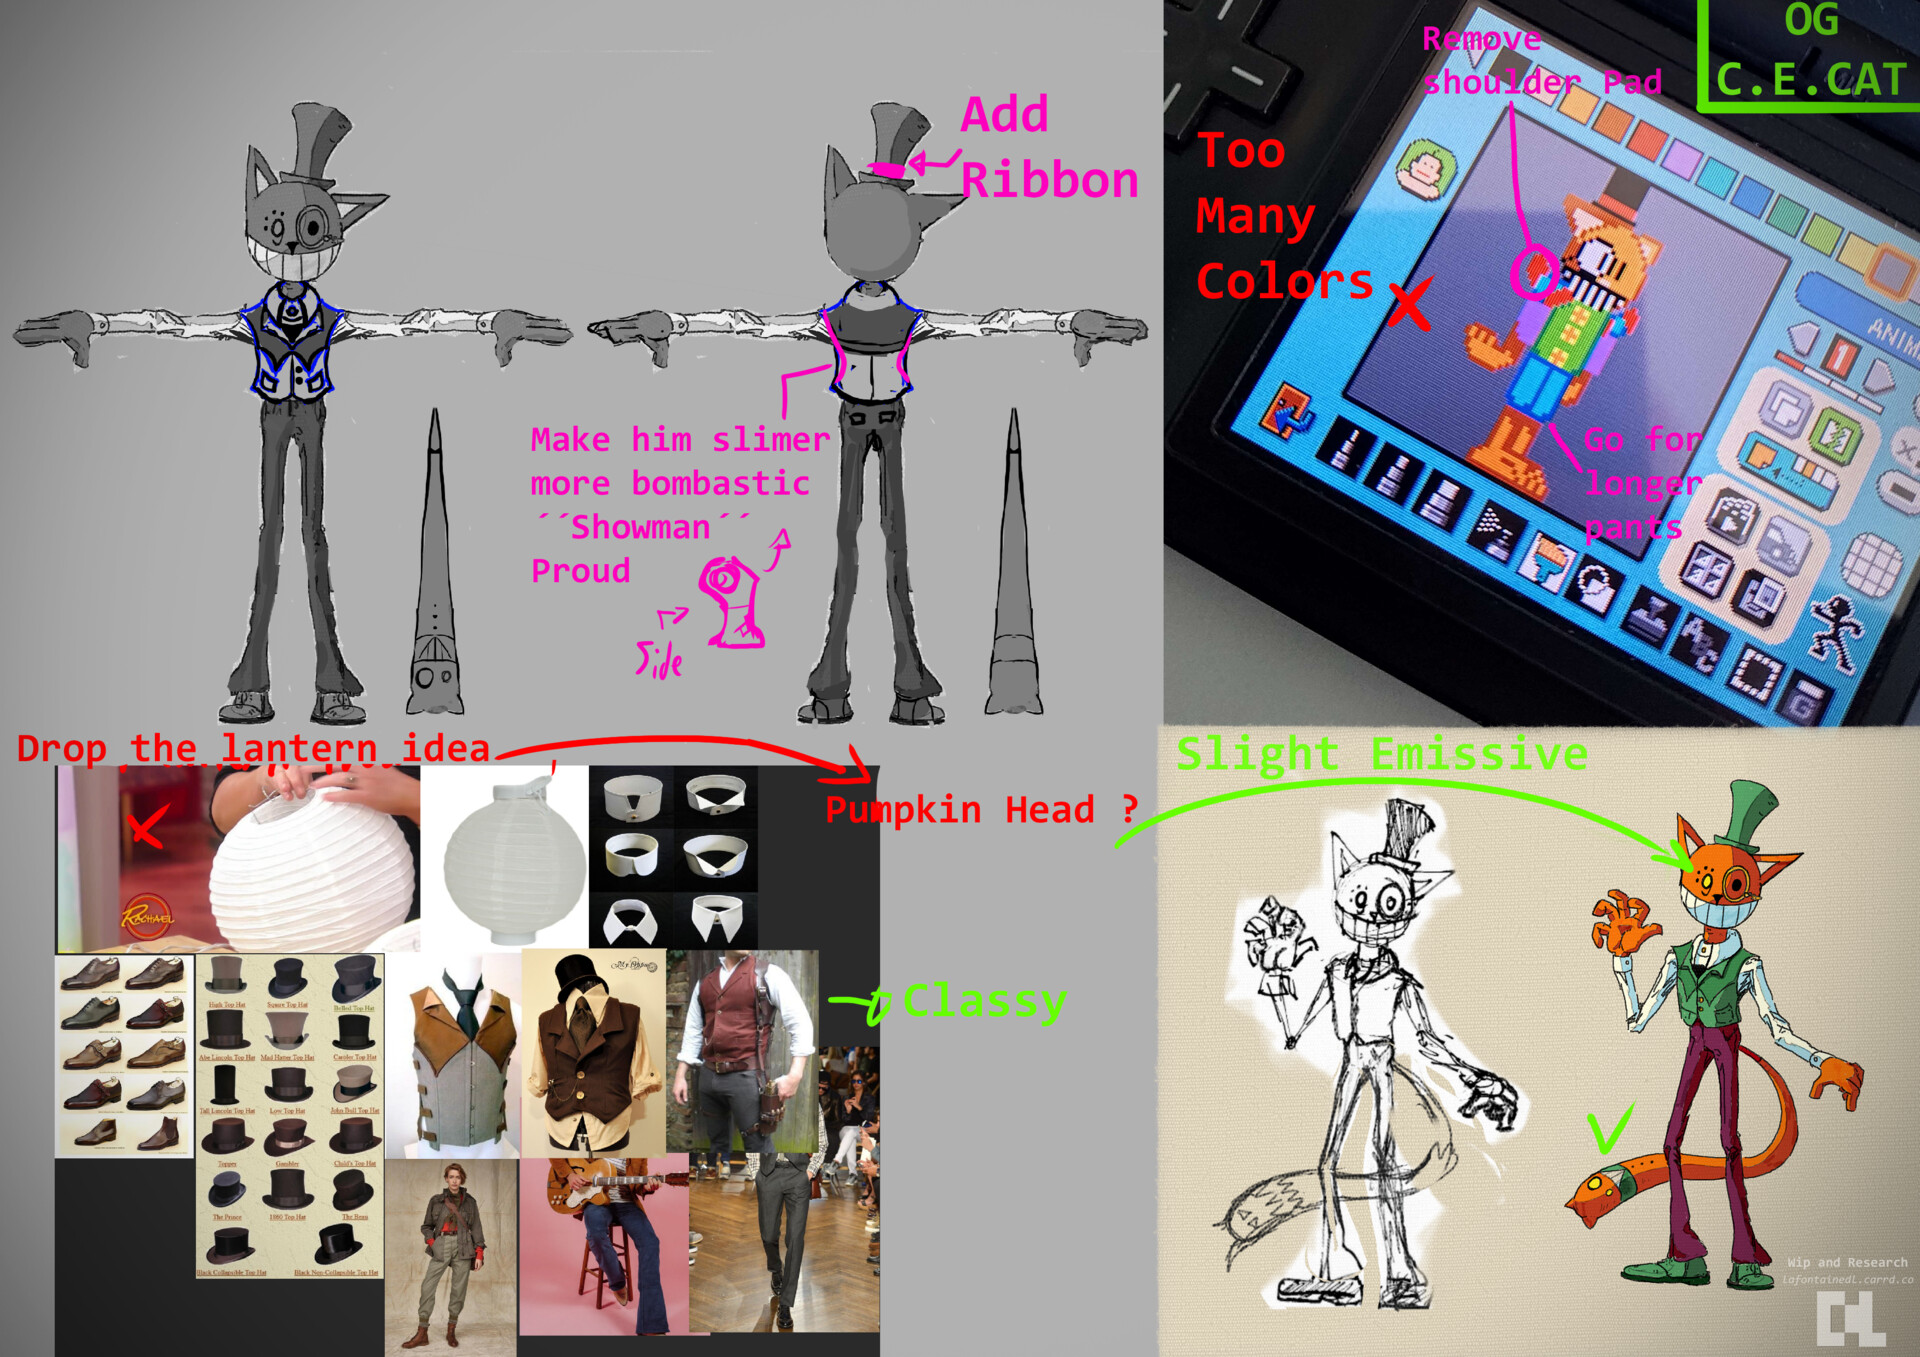 160 Five nights at Freddy's pictures. ideas